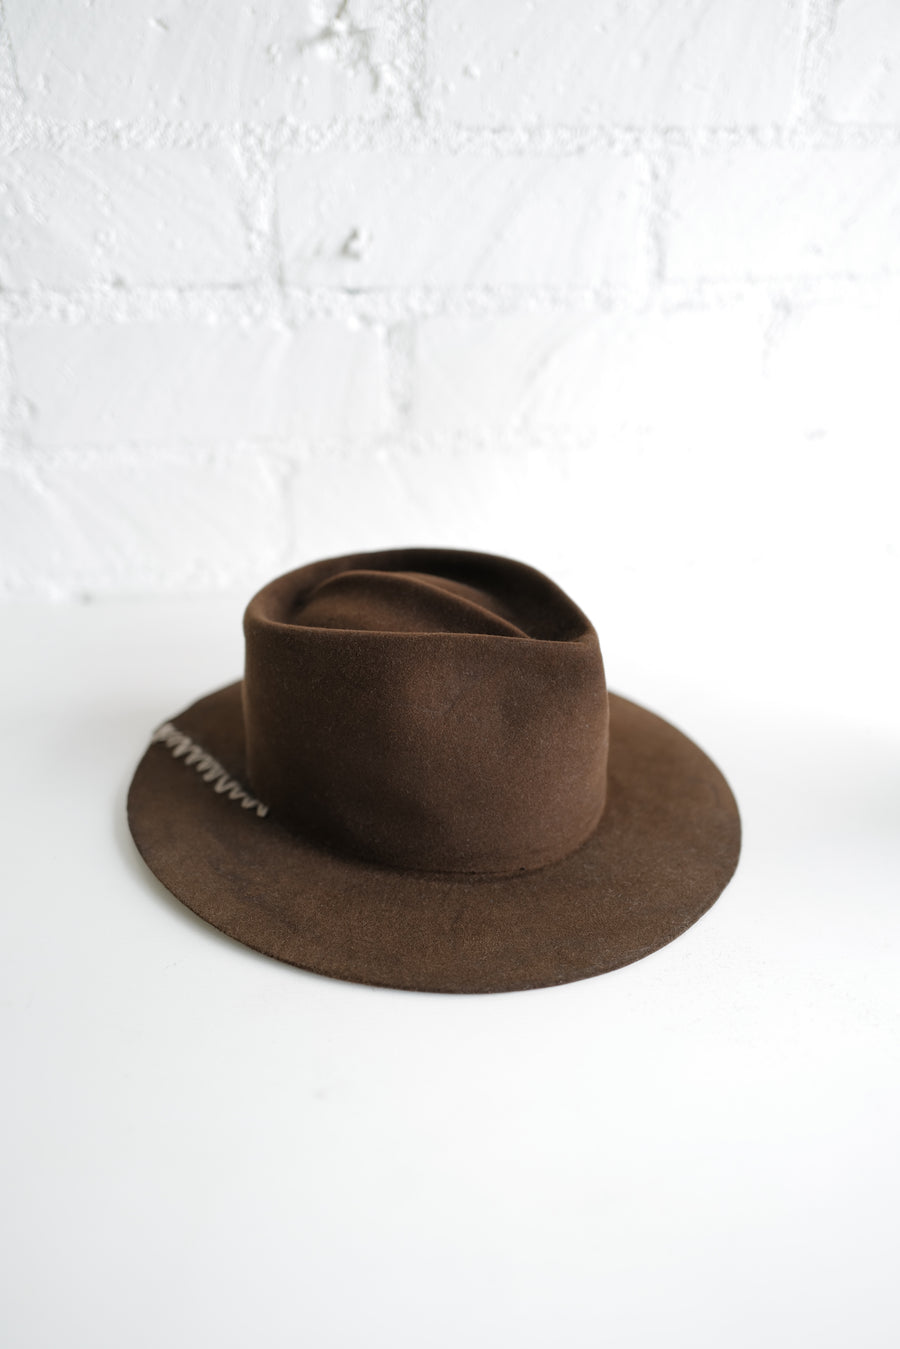 Tall Brown WAREHOUSE SALE - Gladys Tamez Millinery